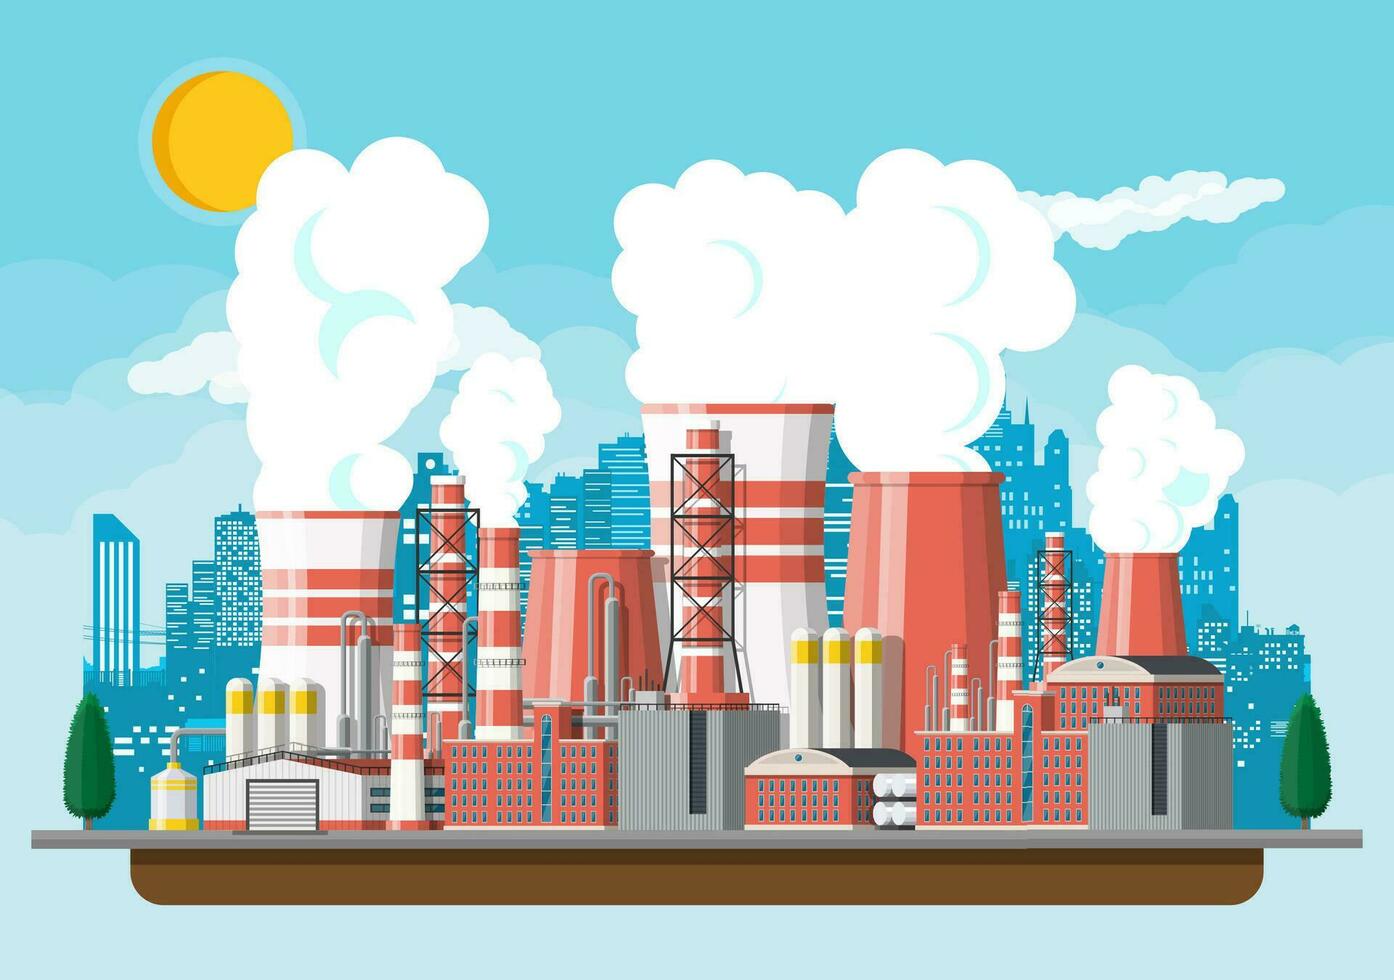 Industrial factory, power plant. vector